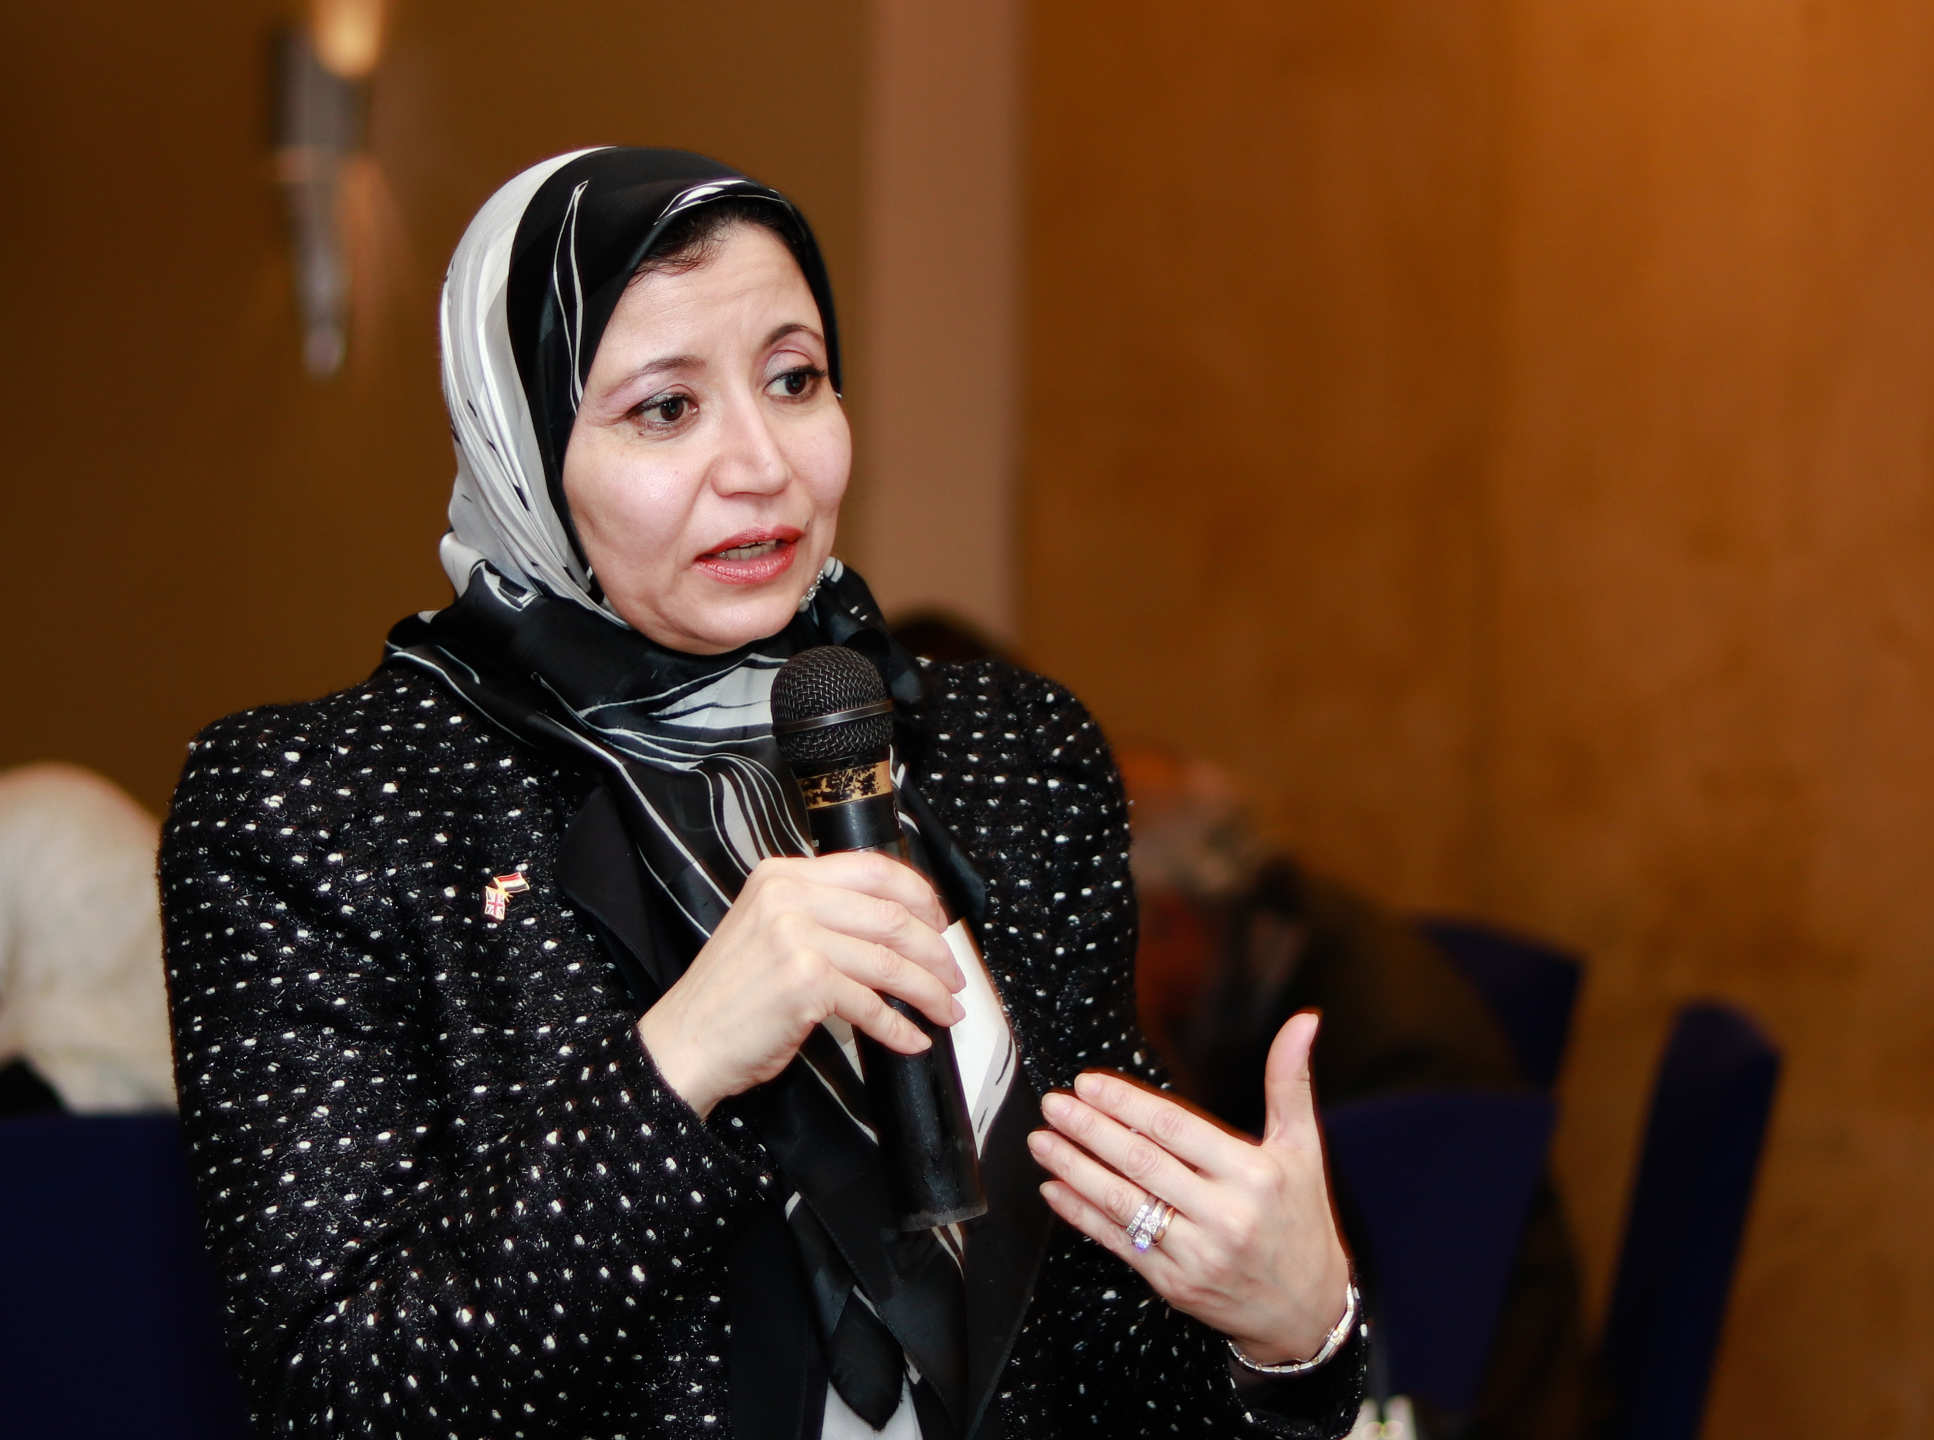 Imperial’s Dr Mona El-Bahrawy updated alumni on Imperial developments